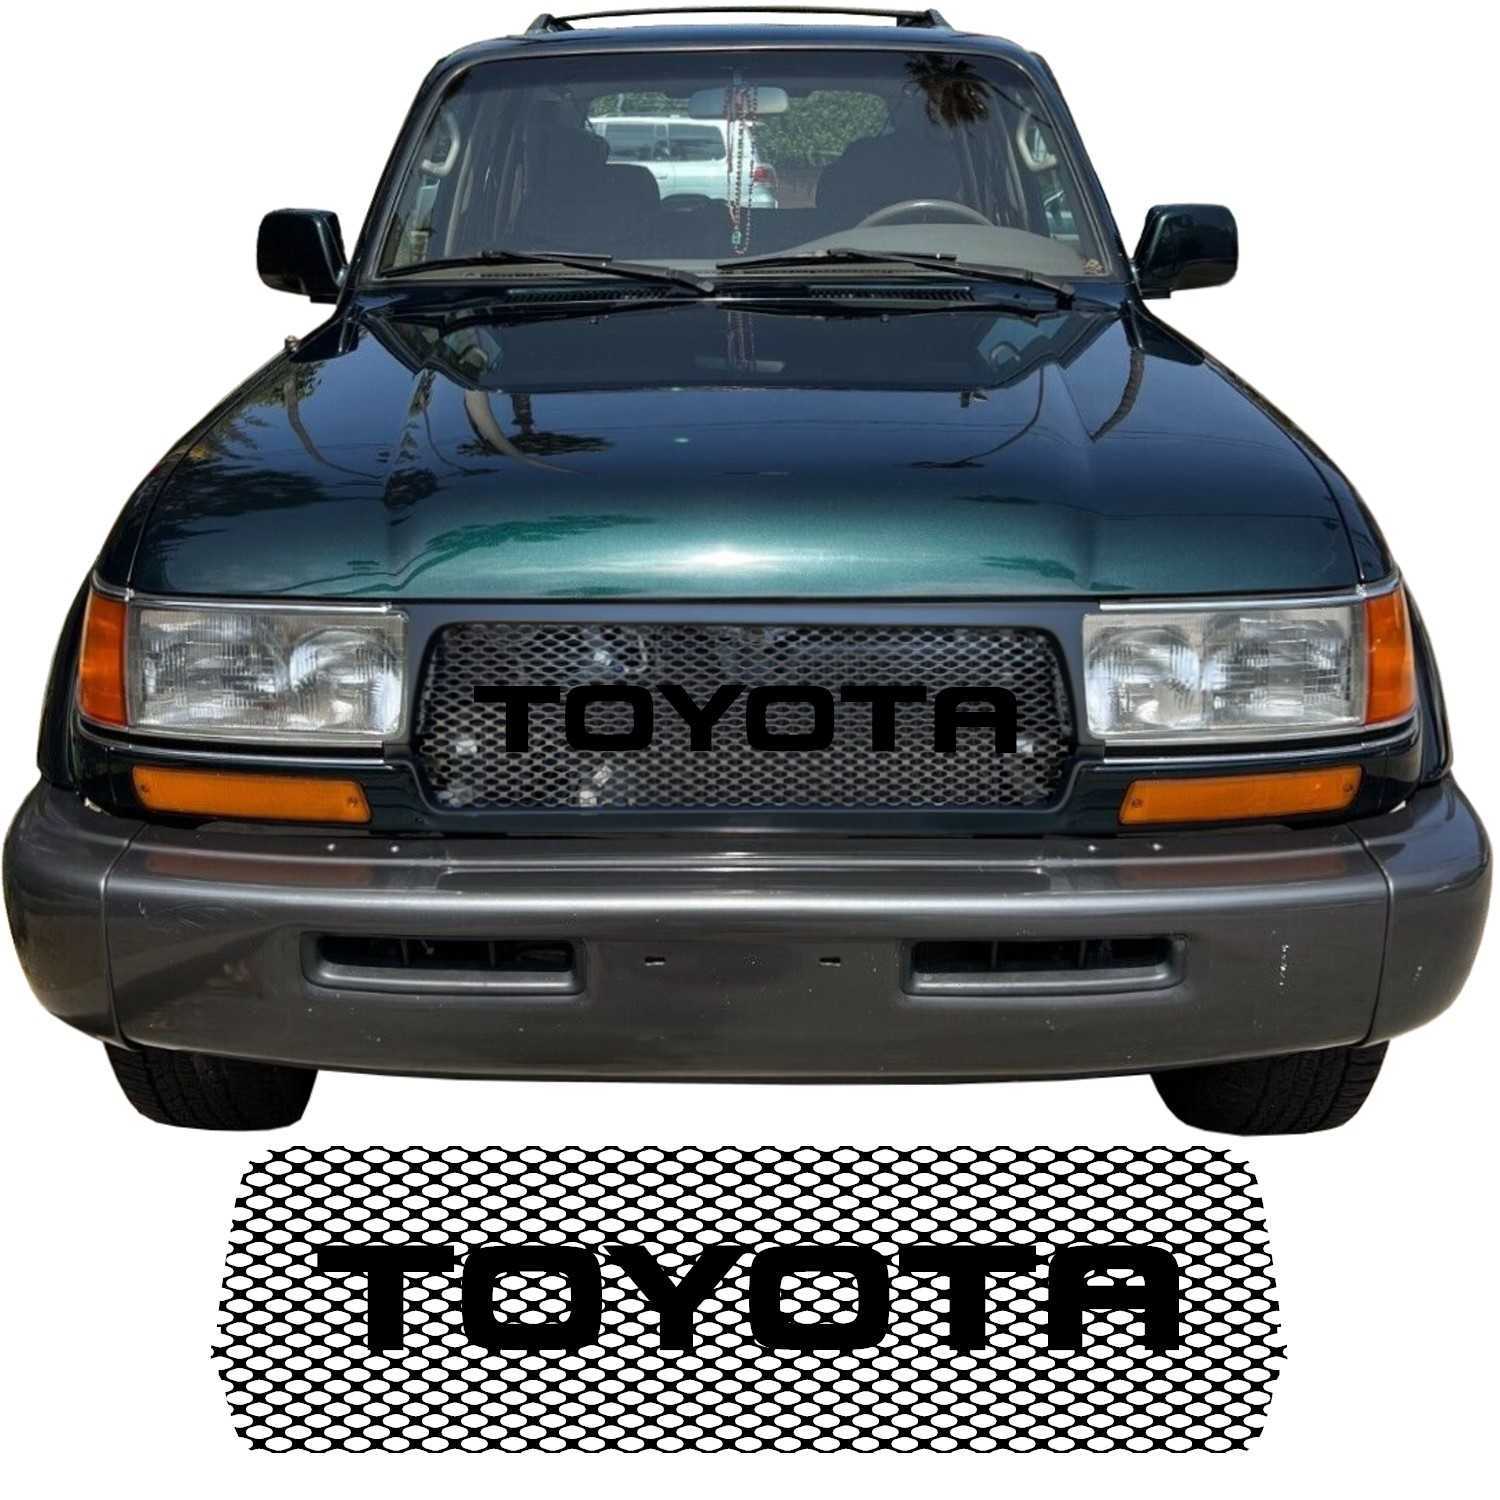 1991 - 1994 Toyota Land Cruiser Series 80 Grill Mesh and Big Letters